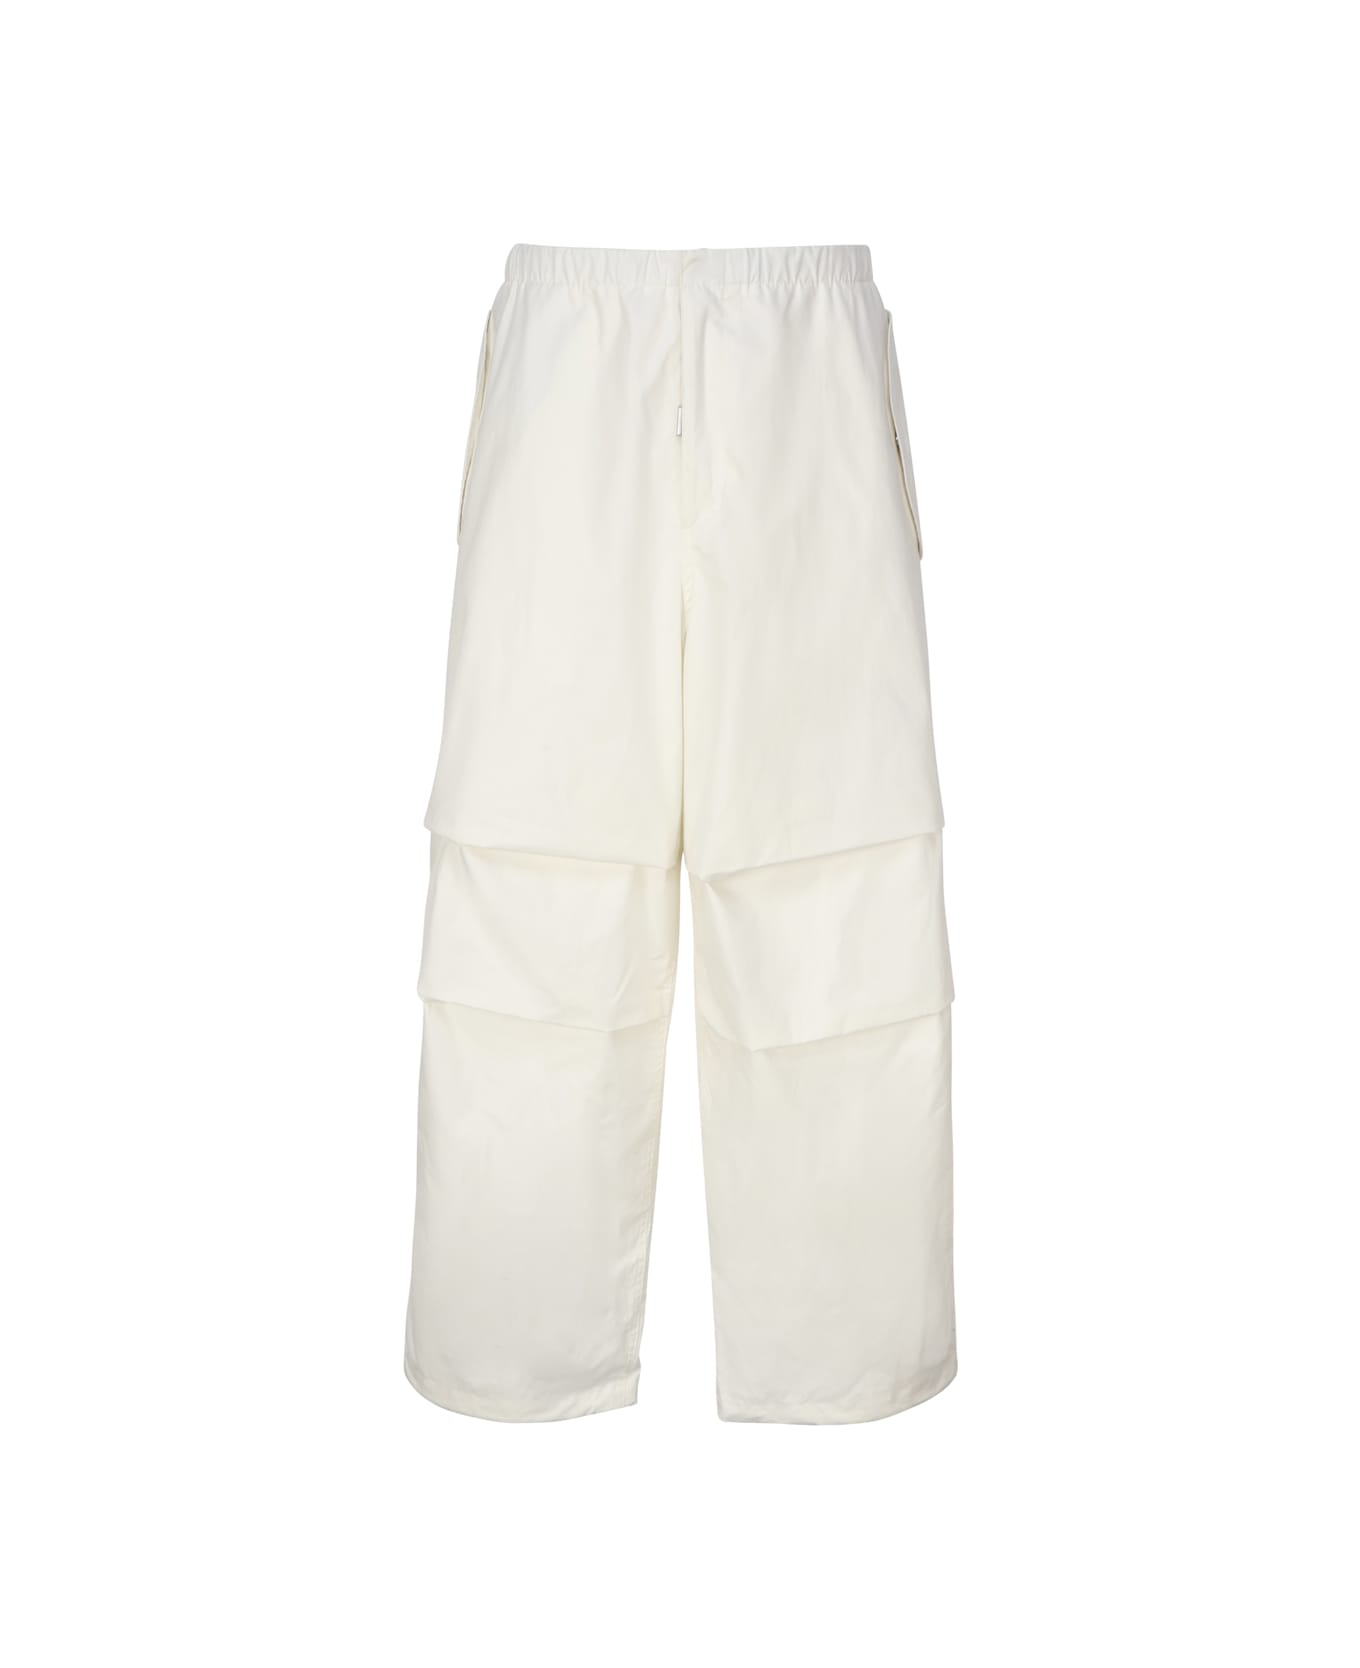 Jil Sander Cotton Trousers With Crease On The Knee - White ボトムス